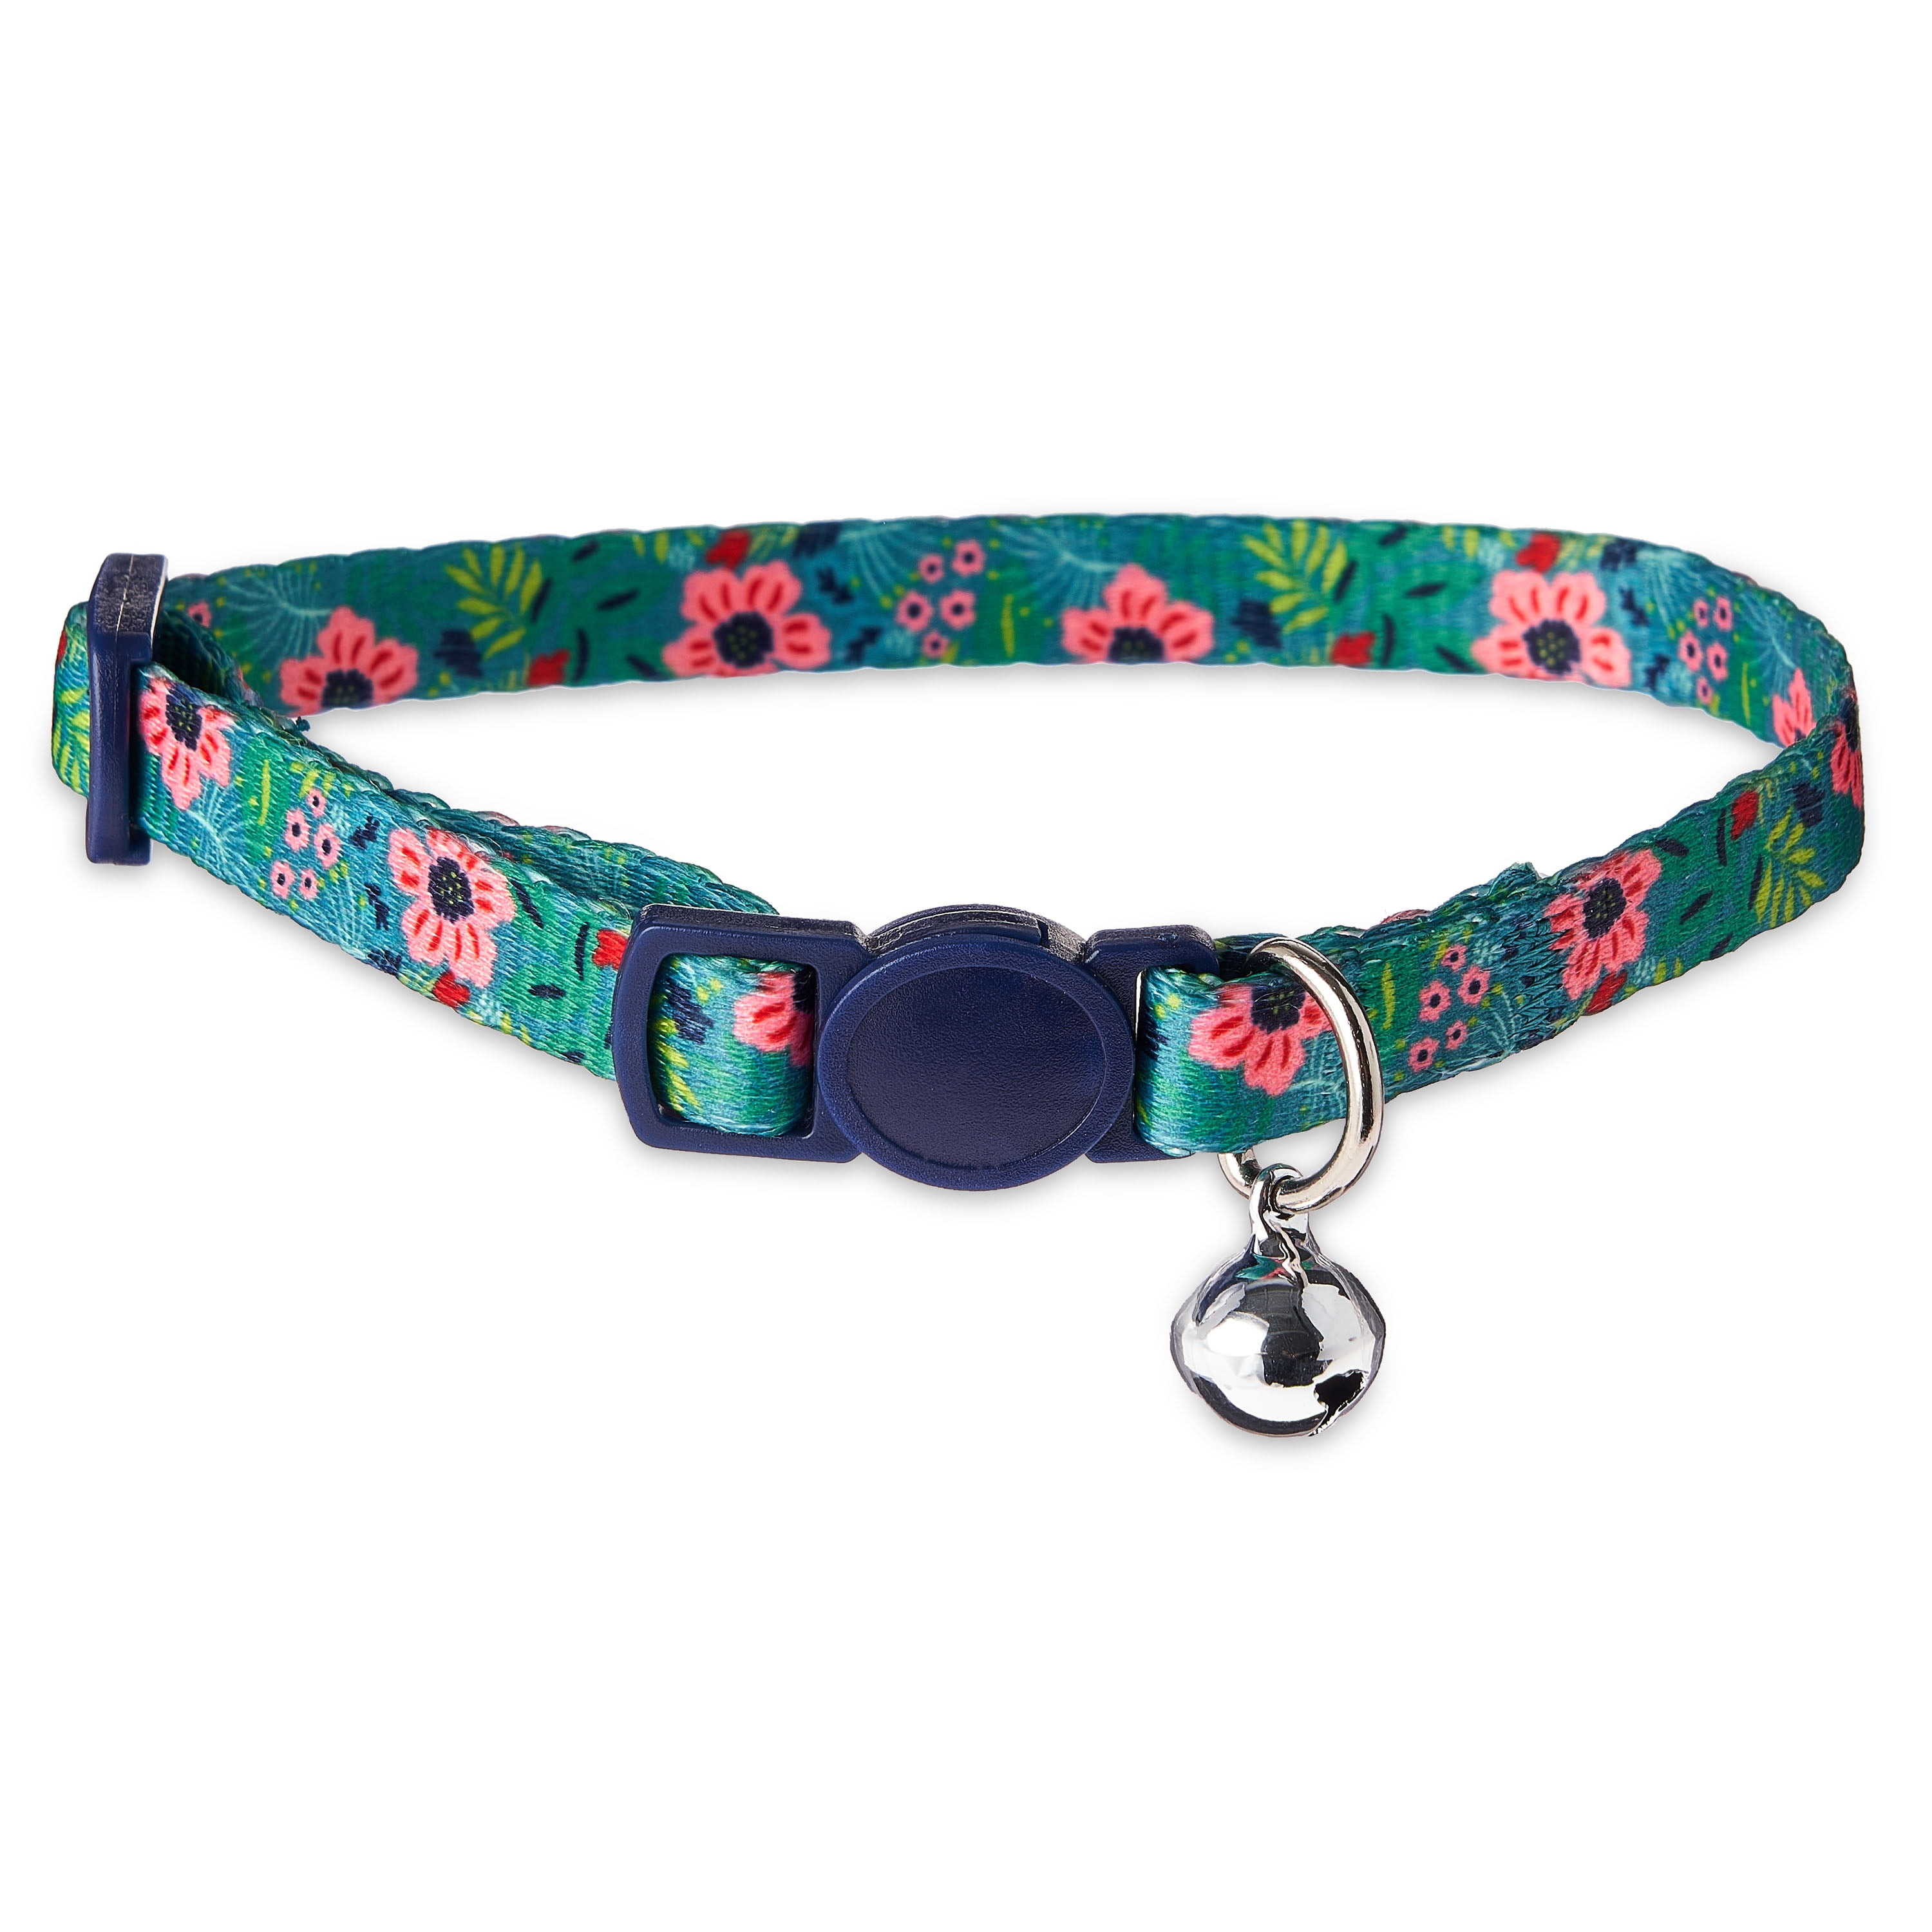 NEW Blue and Pink Dog and Cat Collar in Tropical Flowers by Yellow Dog Design 